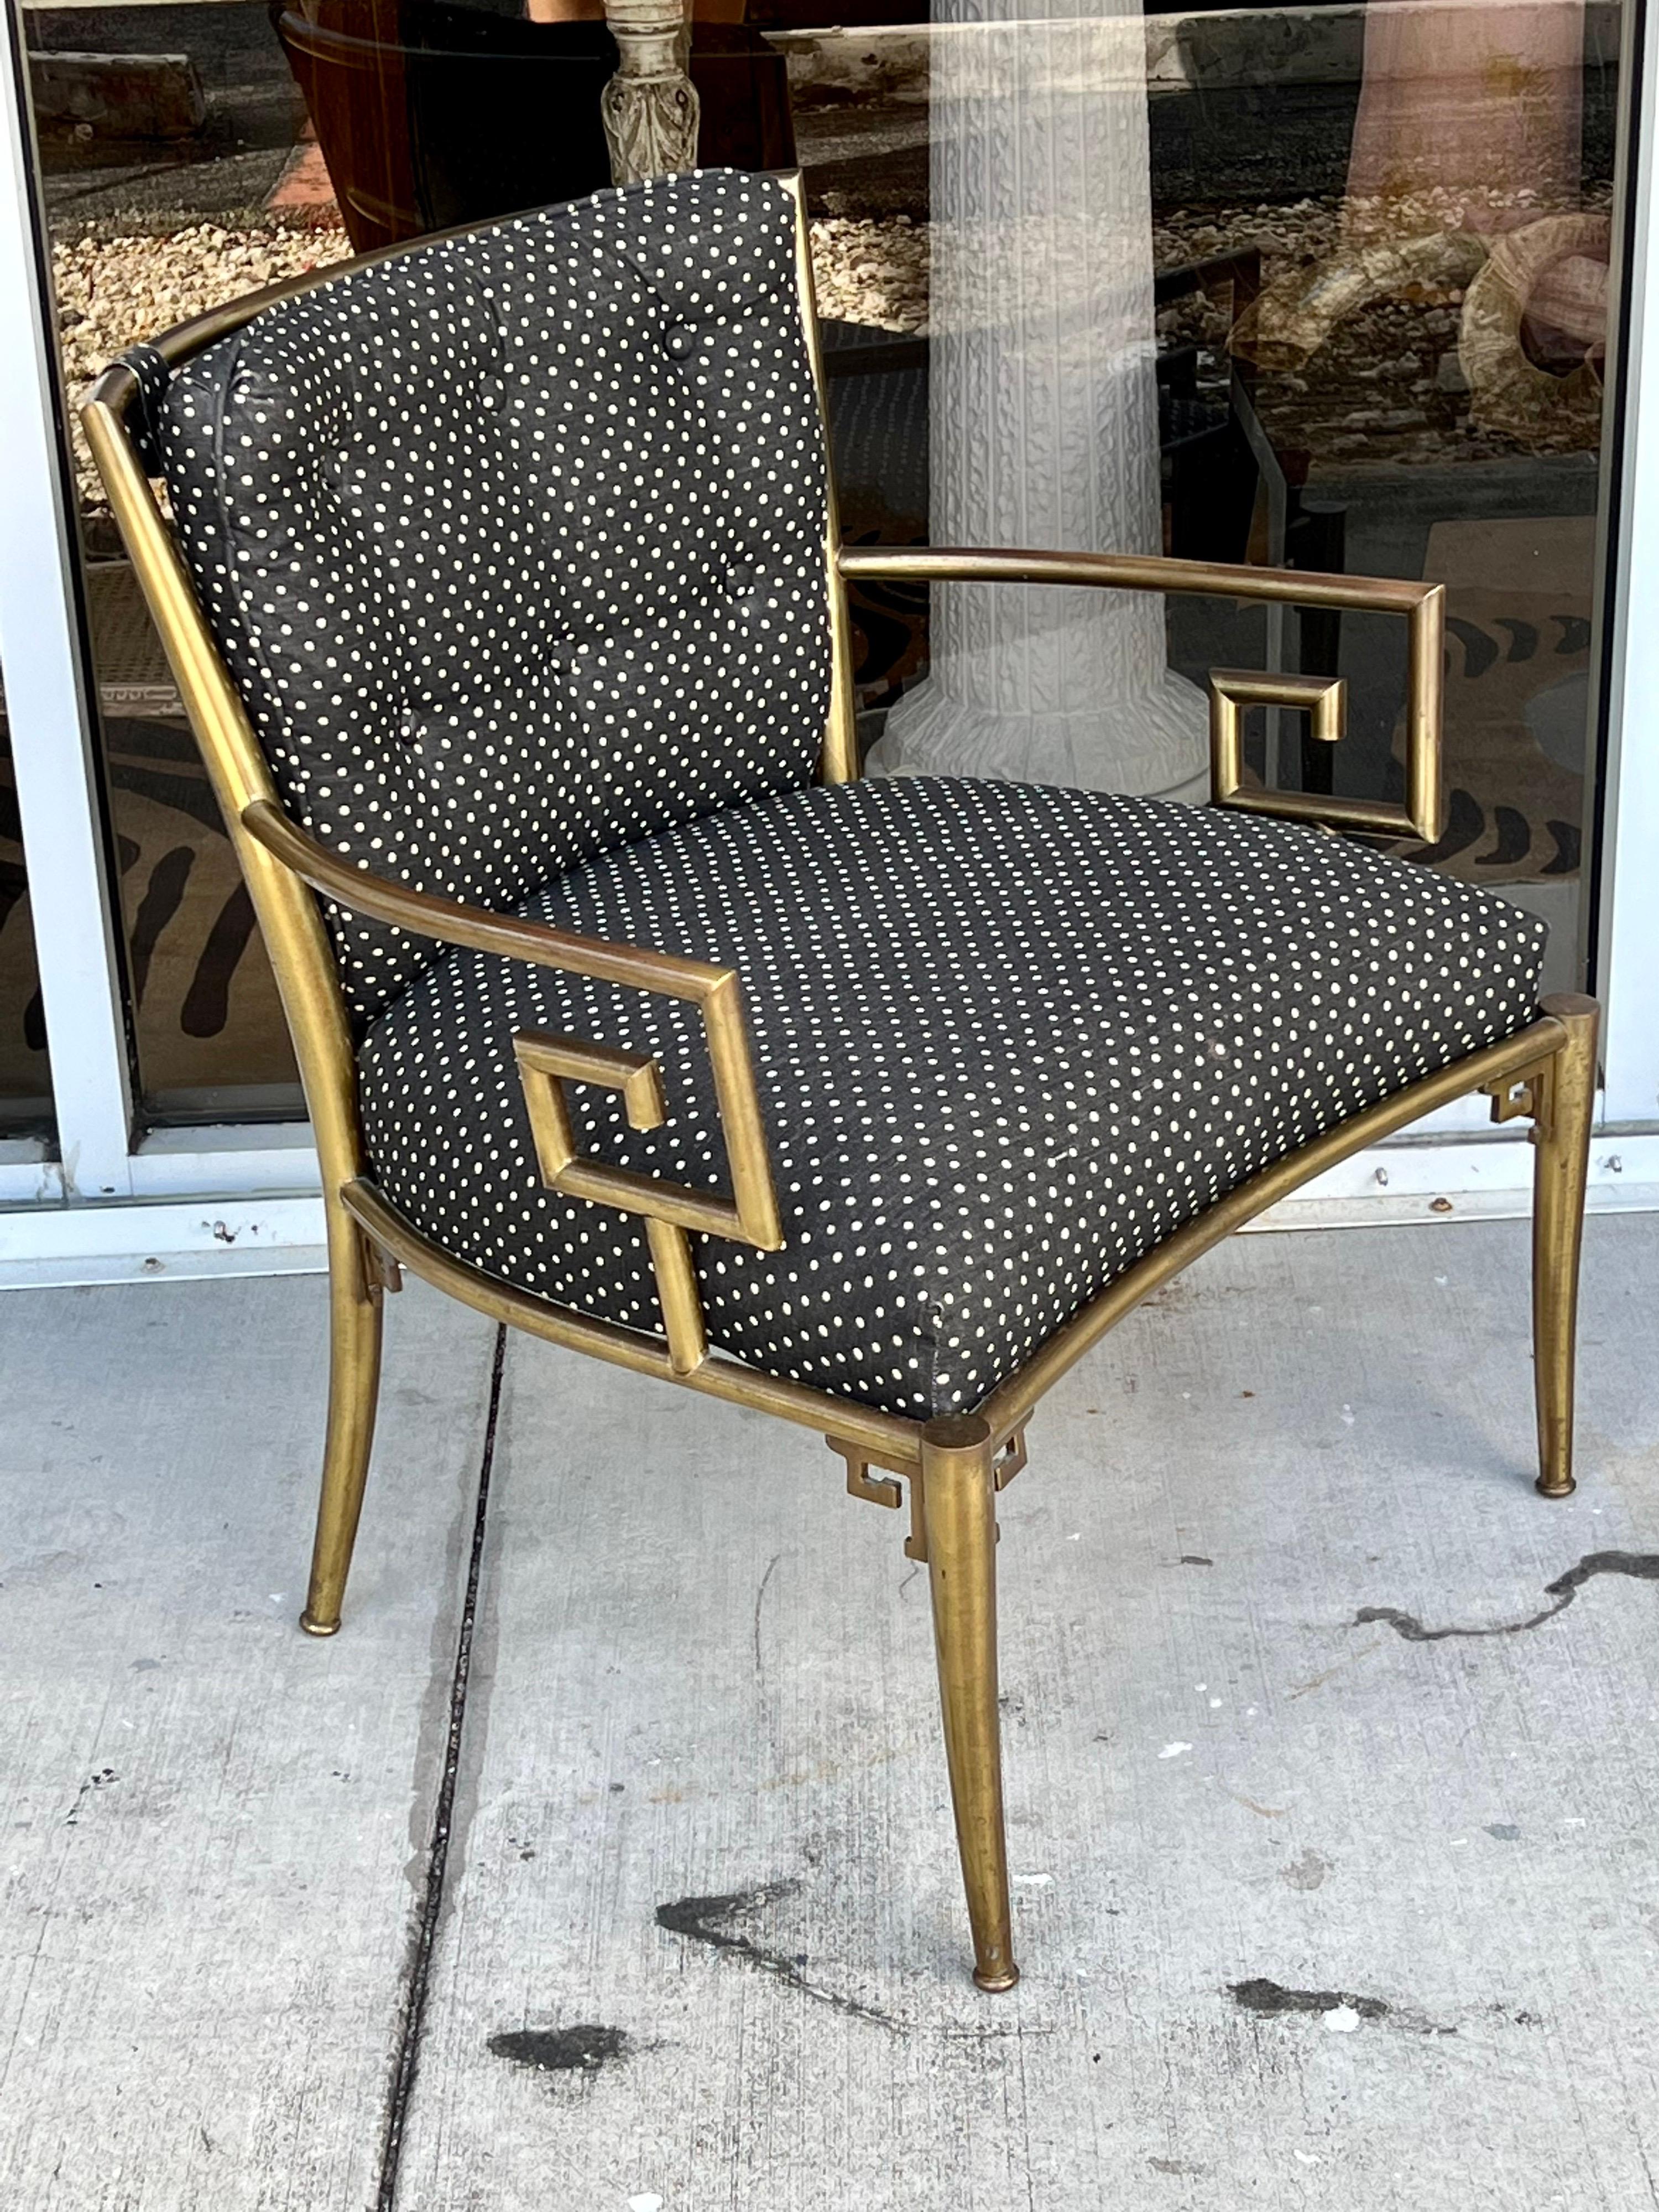 Pair of Mastercraft brass armchairs with upholstered seats.
Some patina on the brass that can be polished. Vintage upholstery in good condition, reupholstery recommended.
 